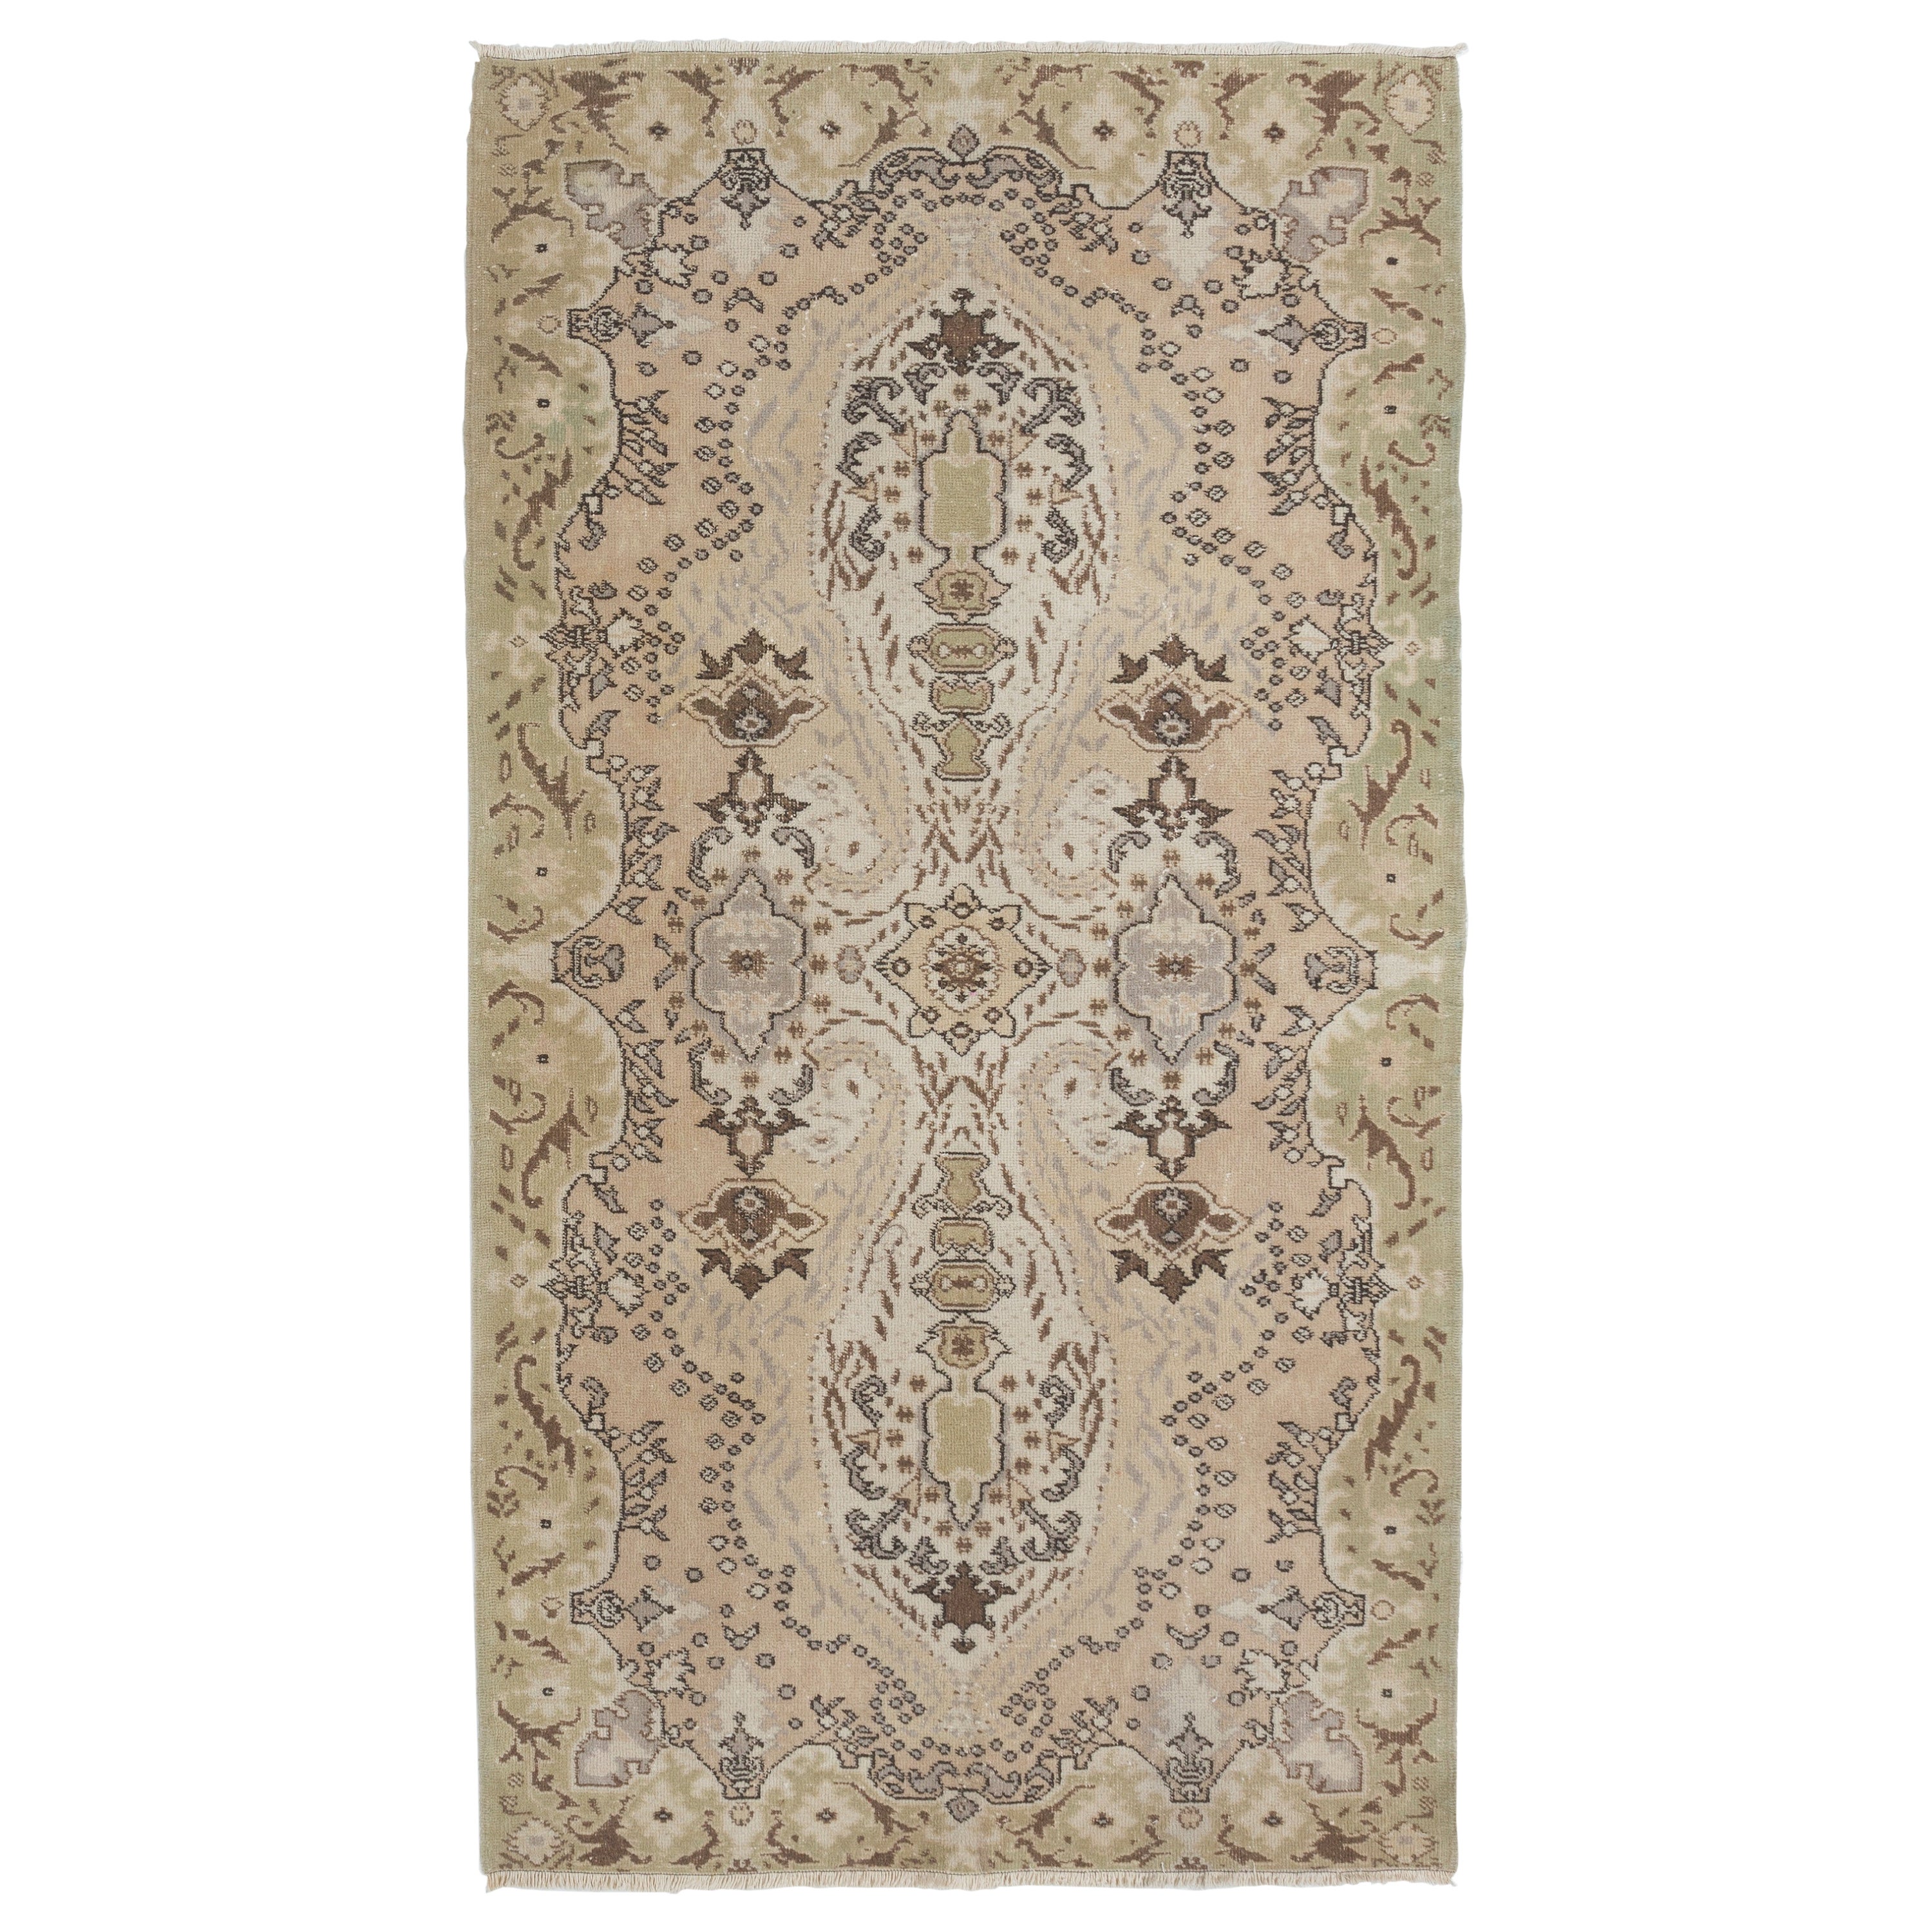 4x7.2 Ft Vintage Hand-Knotted Central Anatolian Wool Accent Rug in Beige